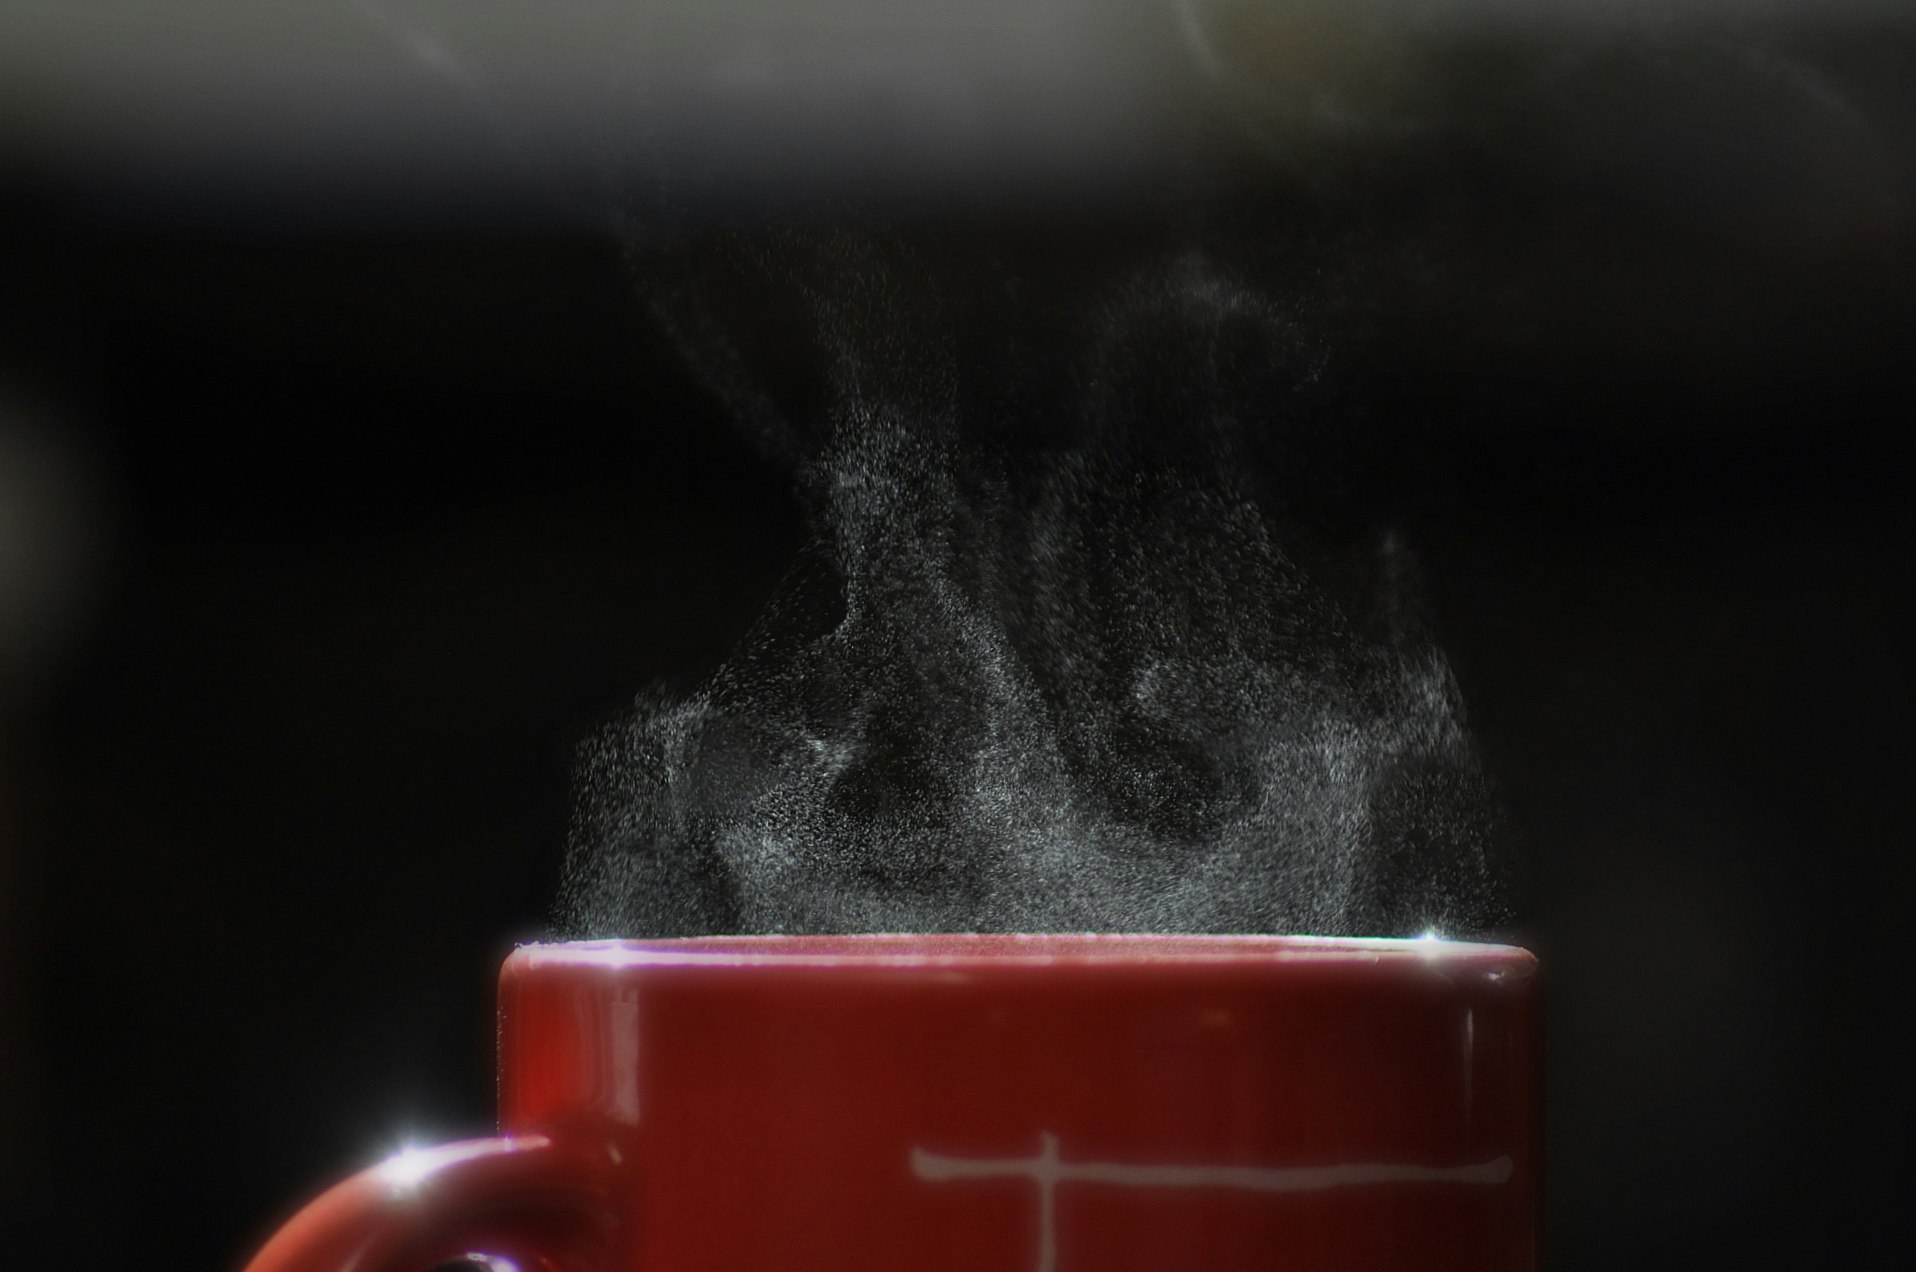 smoke coming out from mug filled with beverage